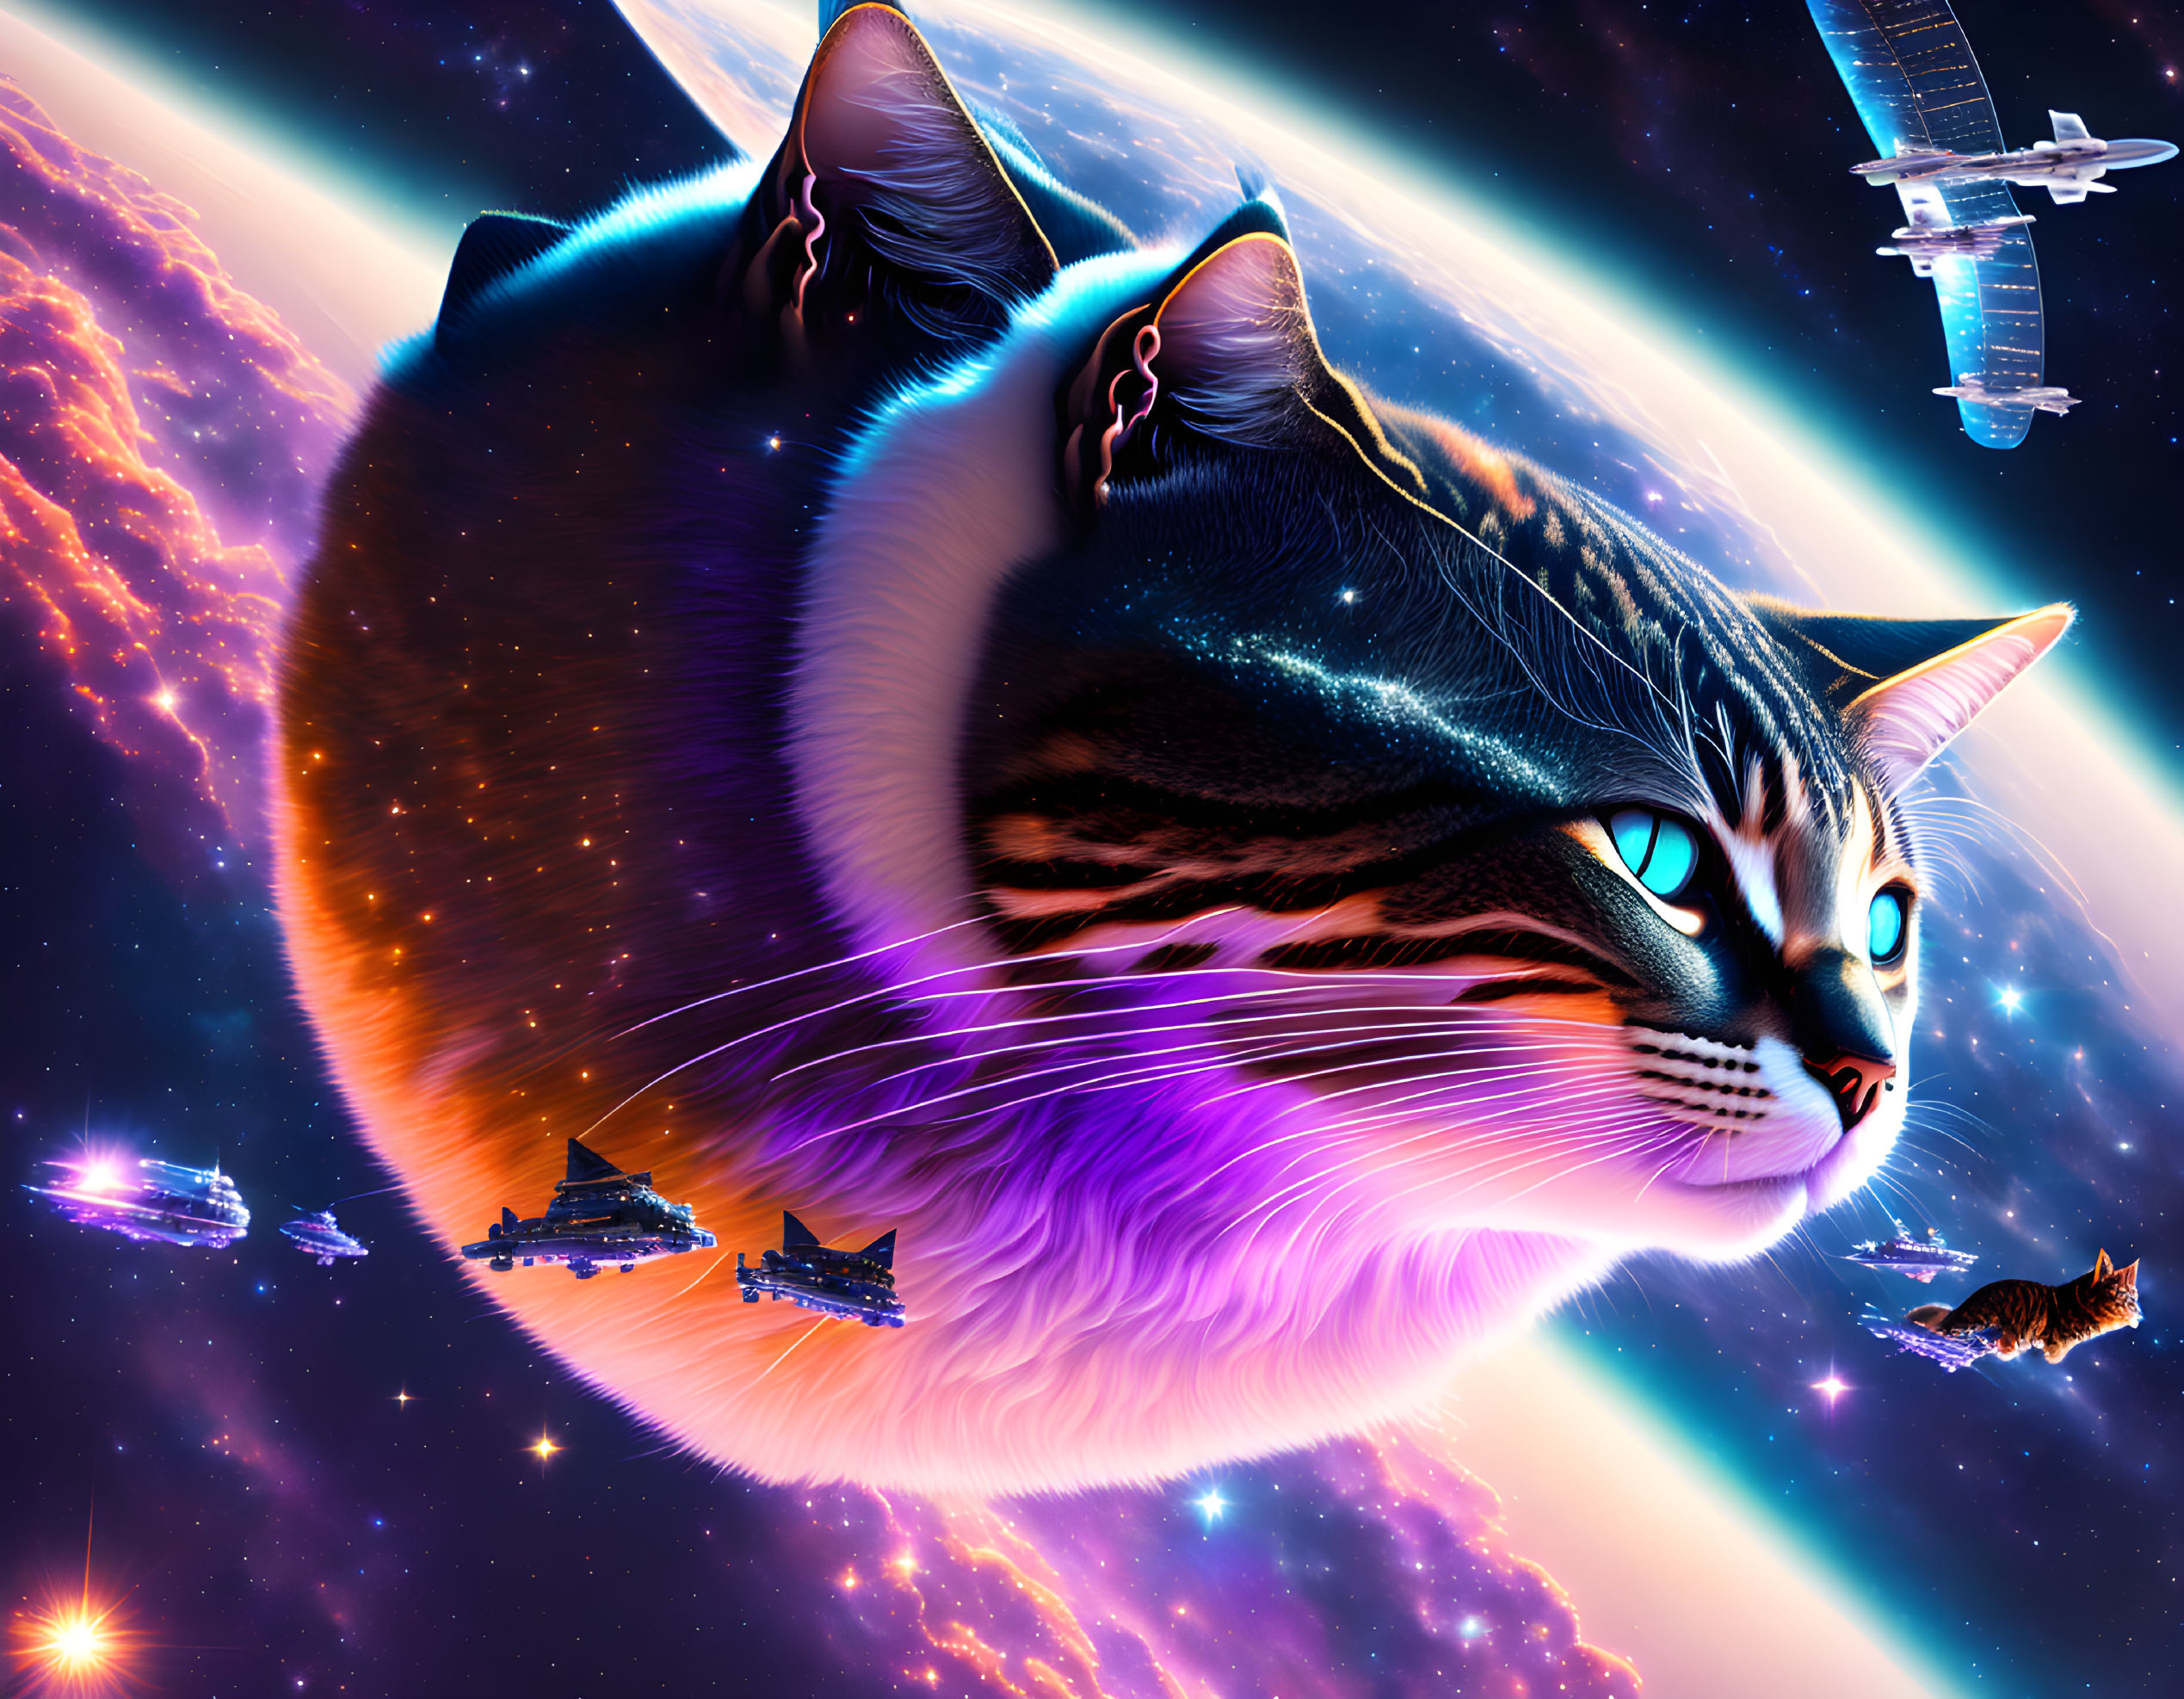 Digital Art: Cosmic Cat in Space with Starships and Galaxies